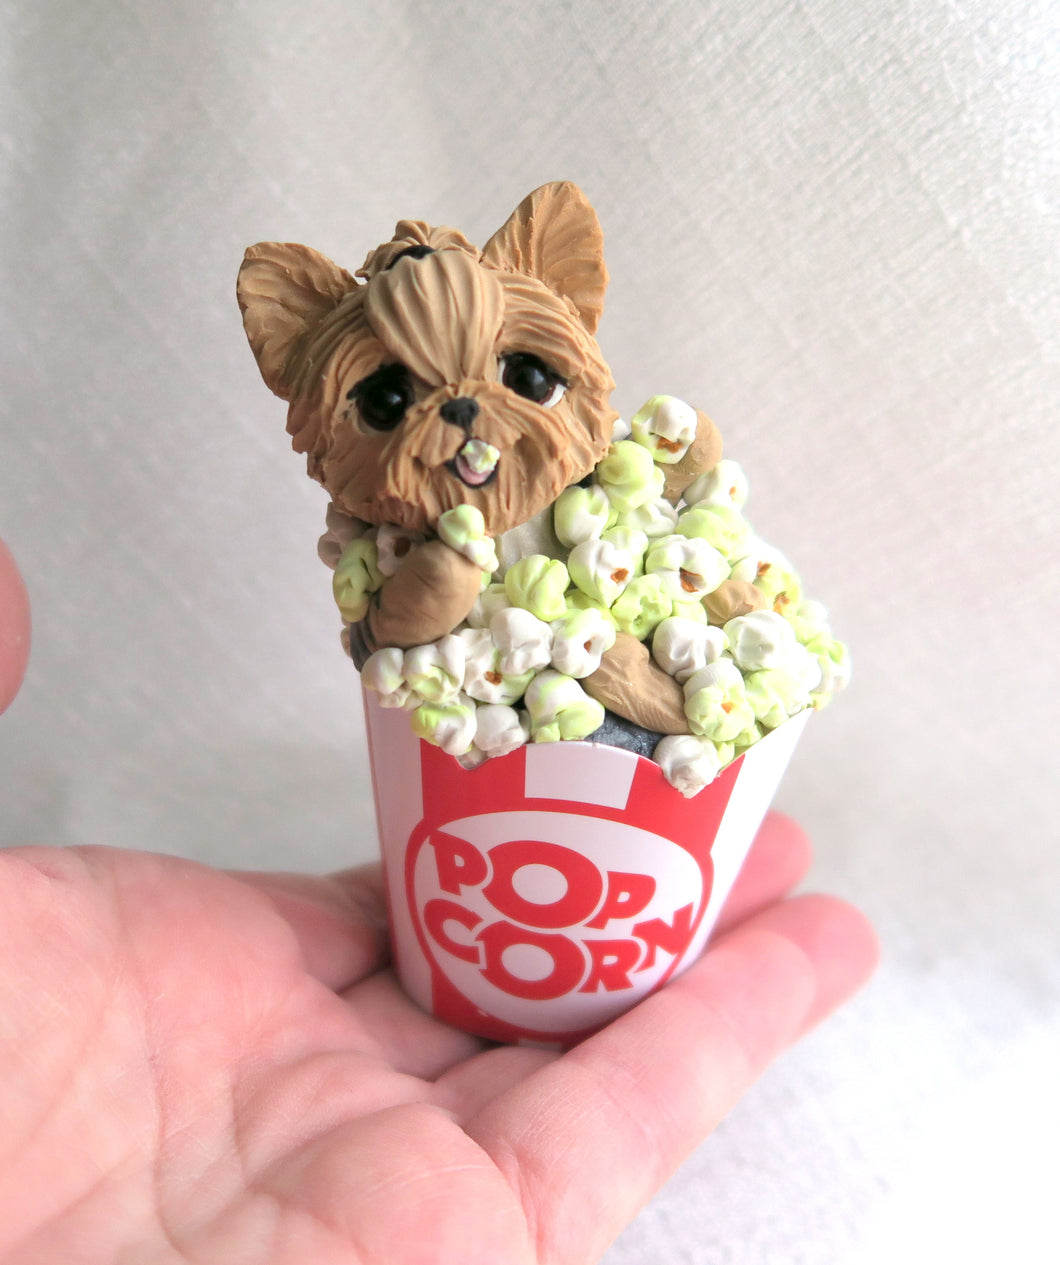 Yorkshire Terrier Movie Night! Popcorn Collectible Hand Sculpted Mini